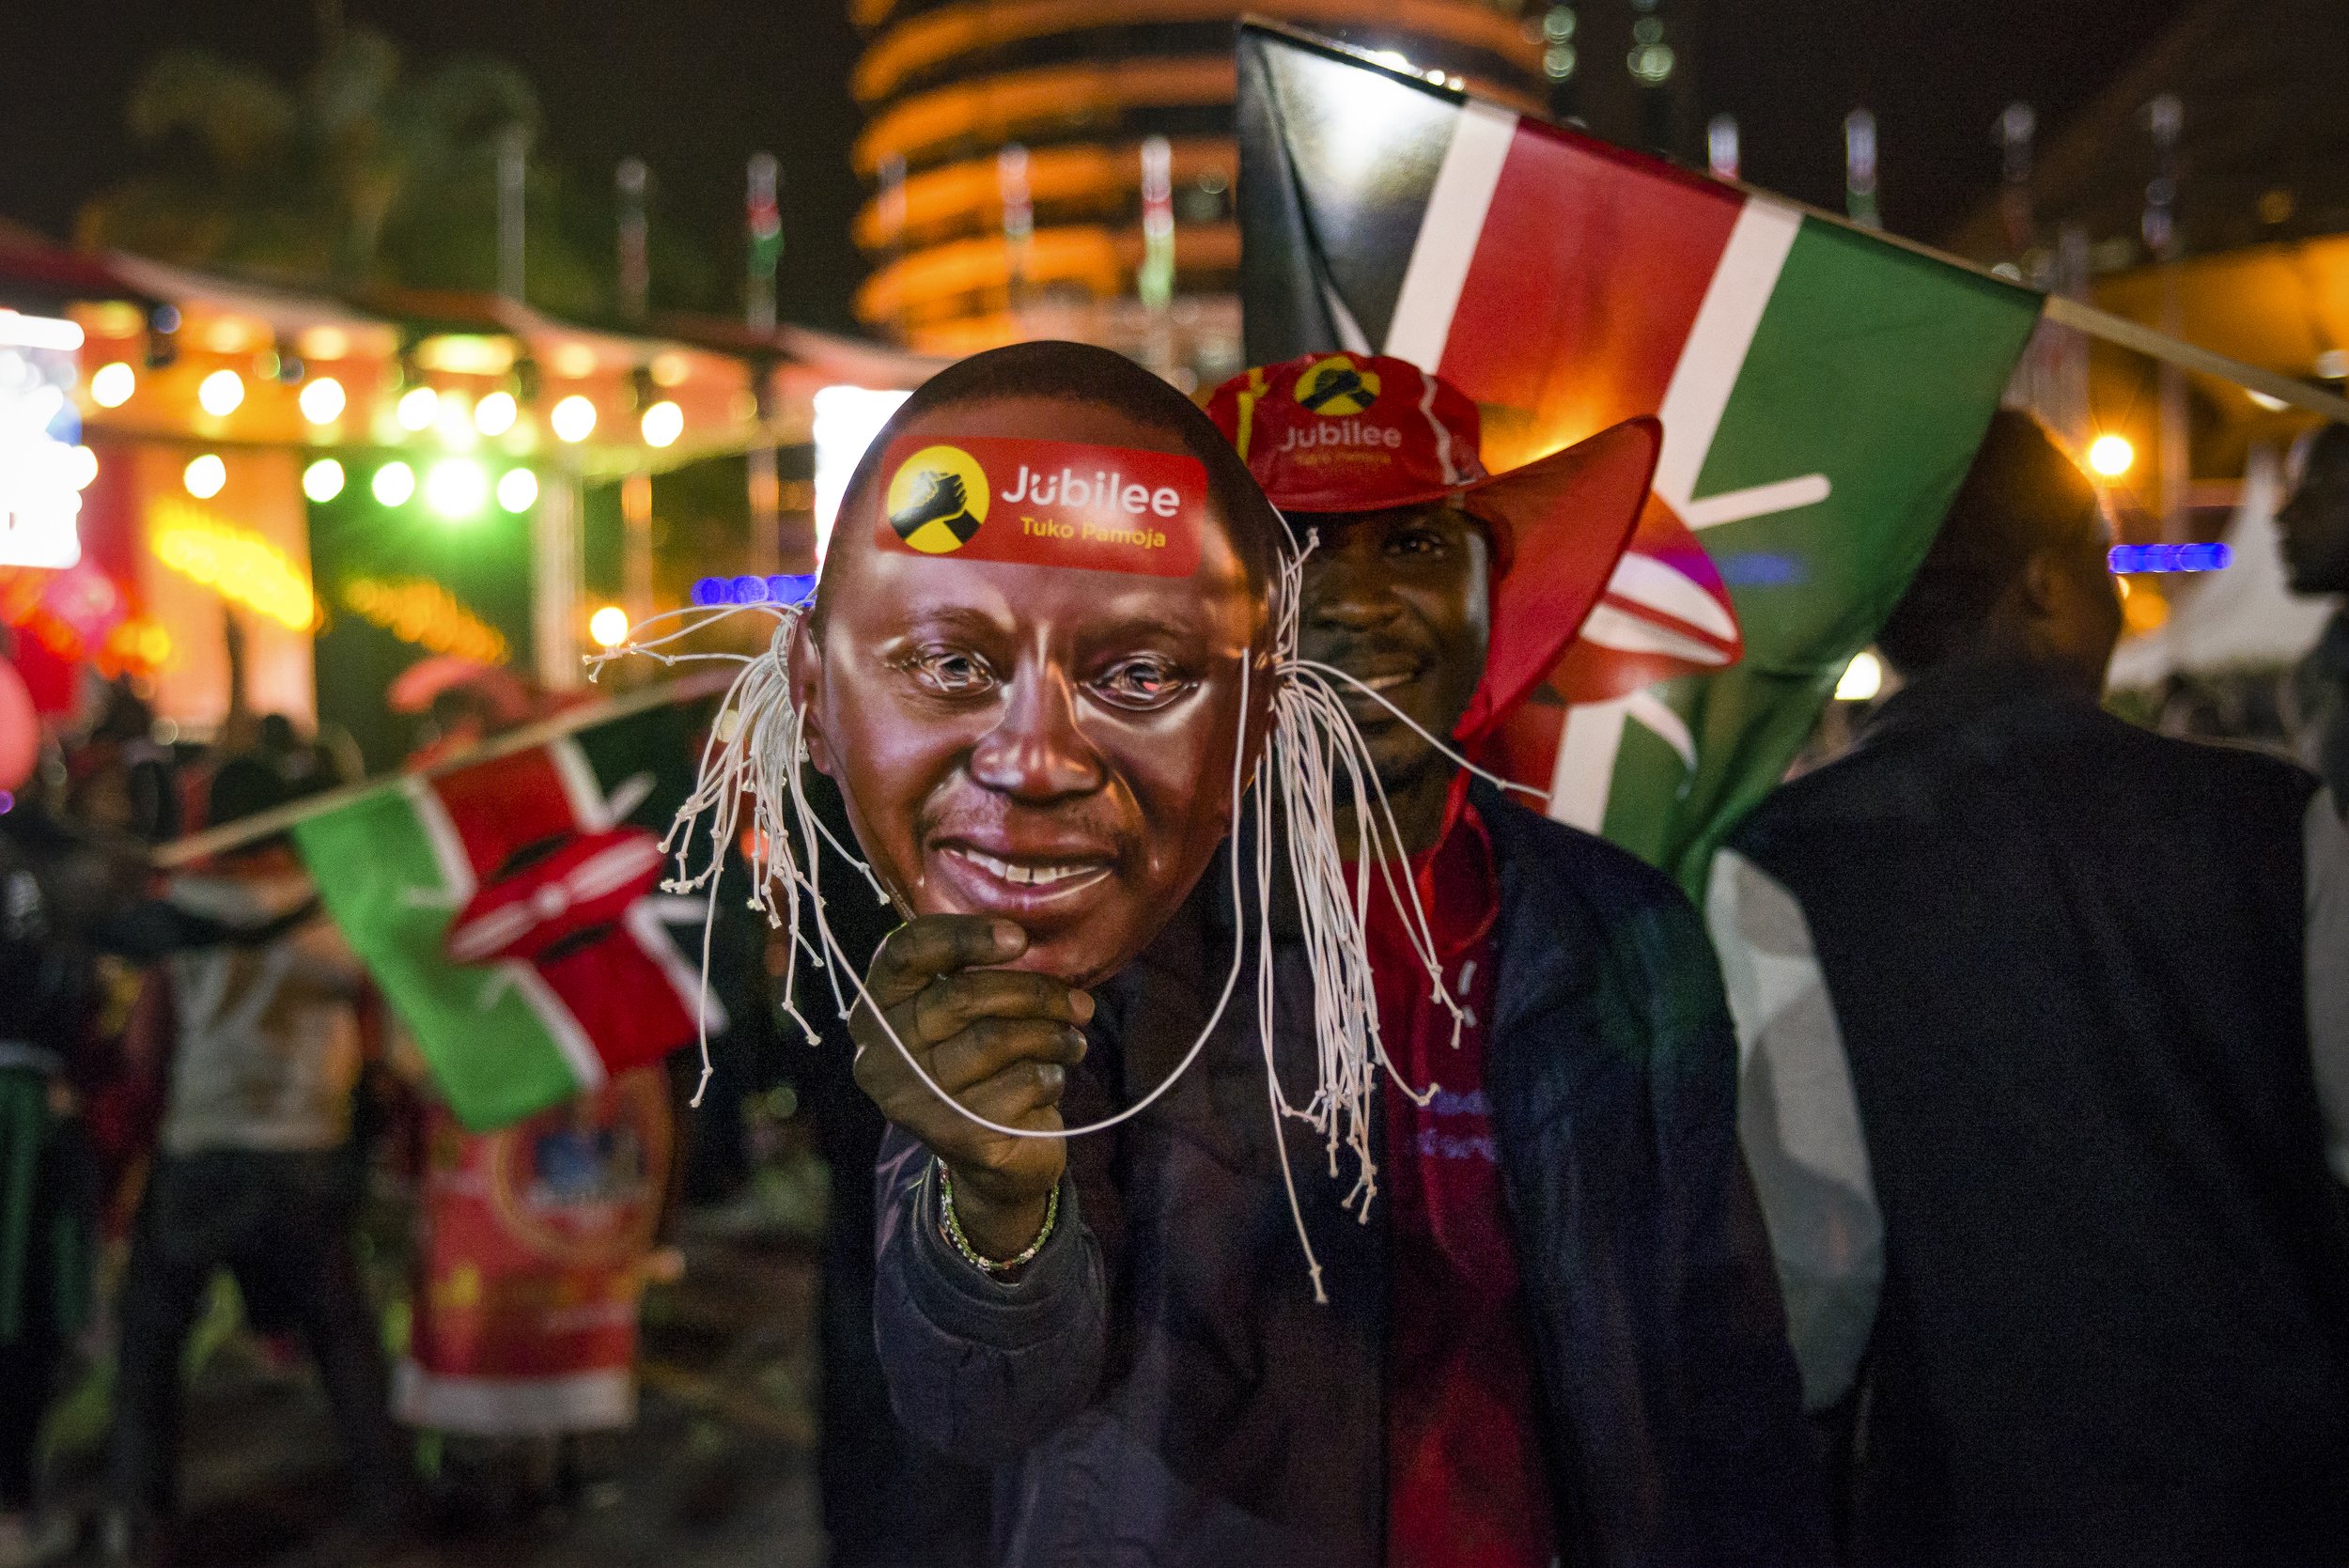  A man holds a paper mask bearing President Uhuru Kenyatta’s face at the celebration event hosted the Jubilee political Party in Nairobi, Kenya. Hundreds gathered in downtown Nairobi to celebrate Kenyatta’s second term win.  